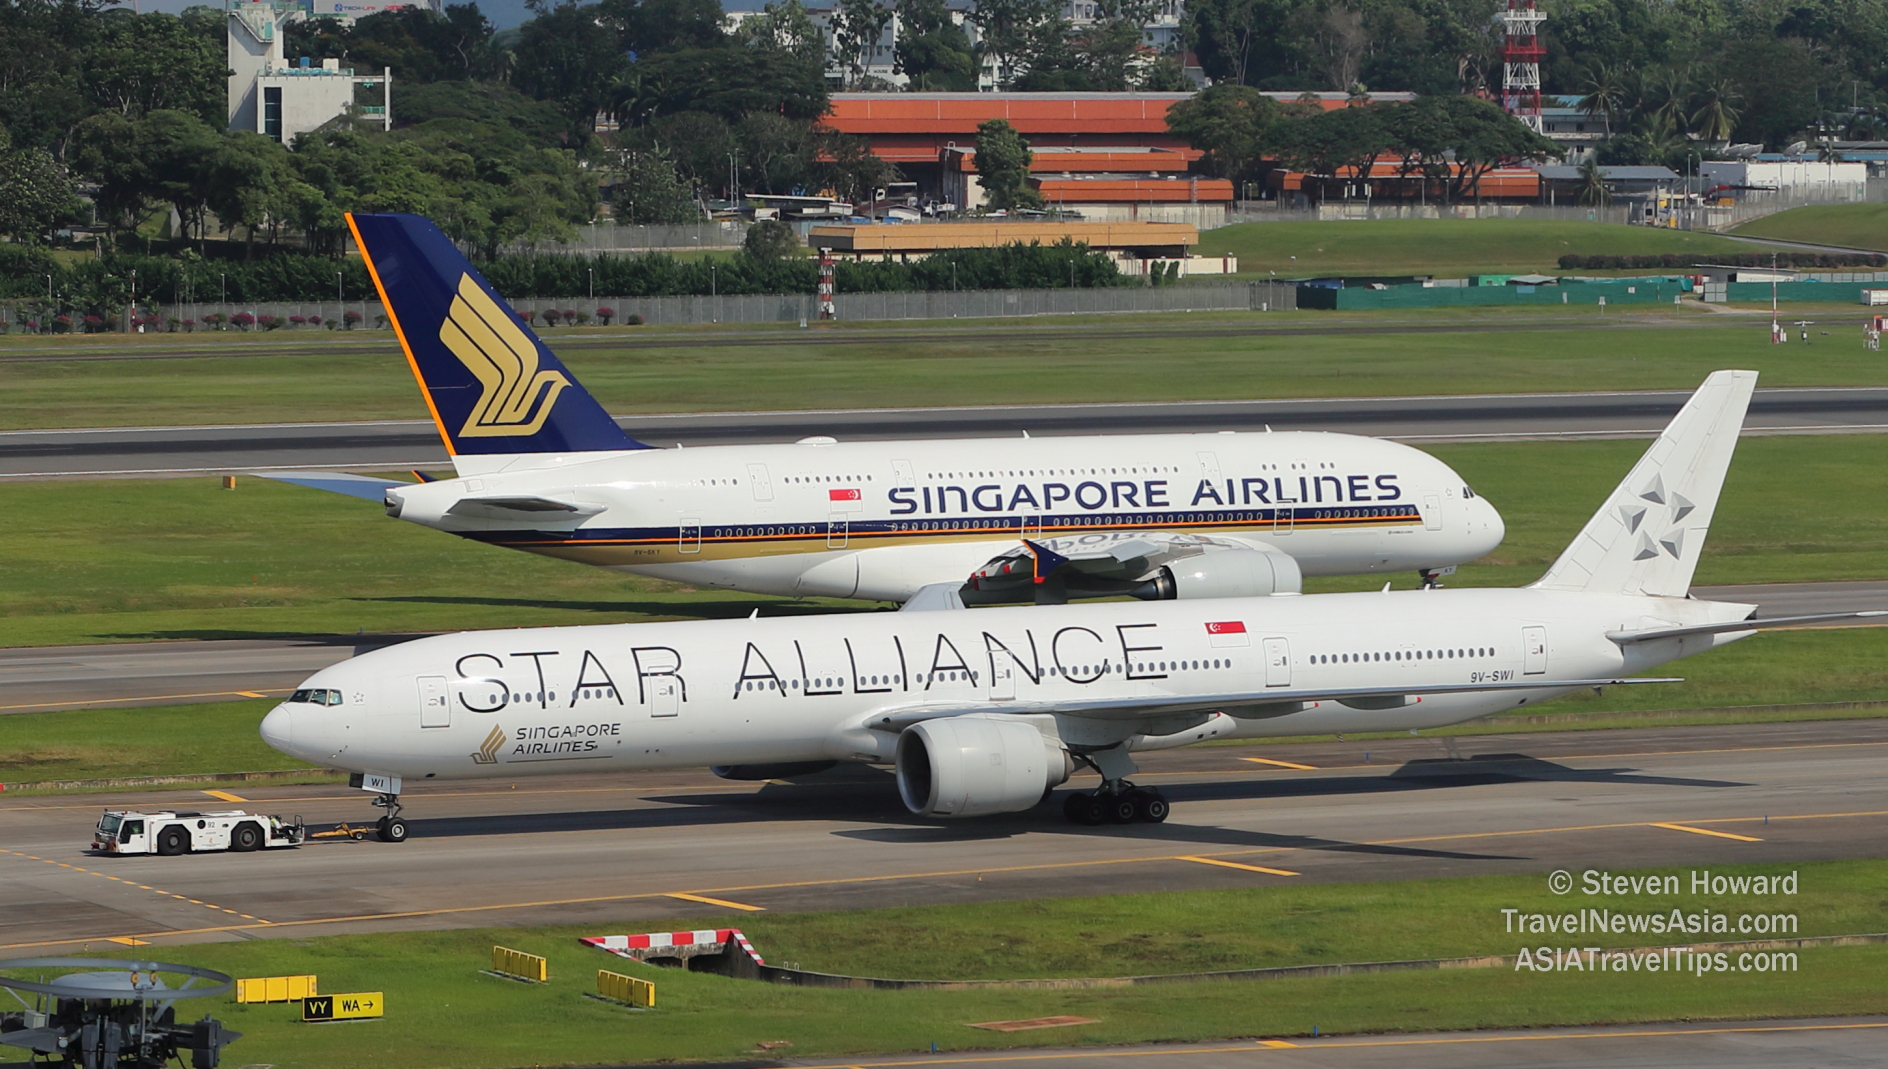 Singapore Airlines A380 and B777 at Changi. Picture by Steven Howard of TravelNewsAsia.com Click to enlarge.